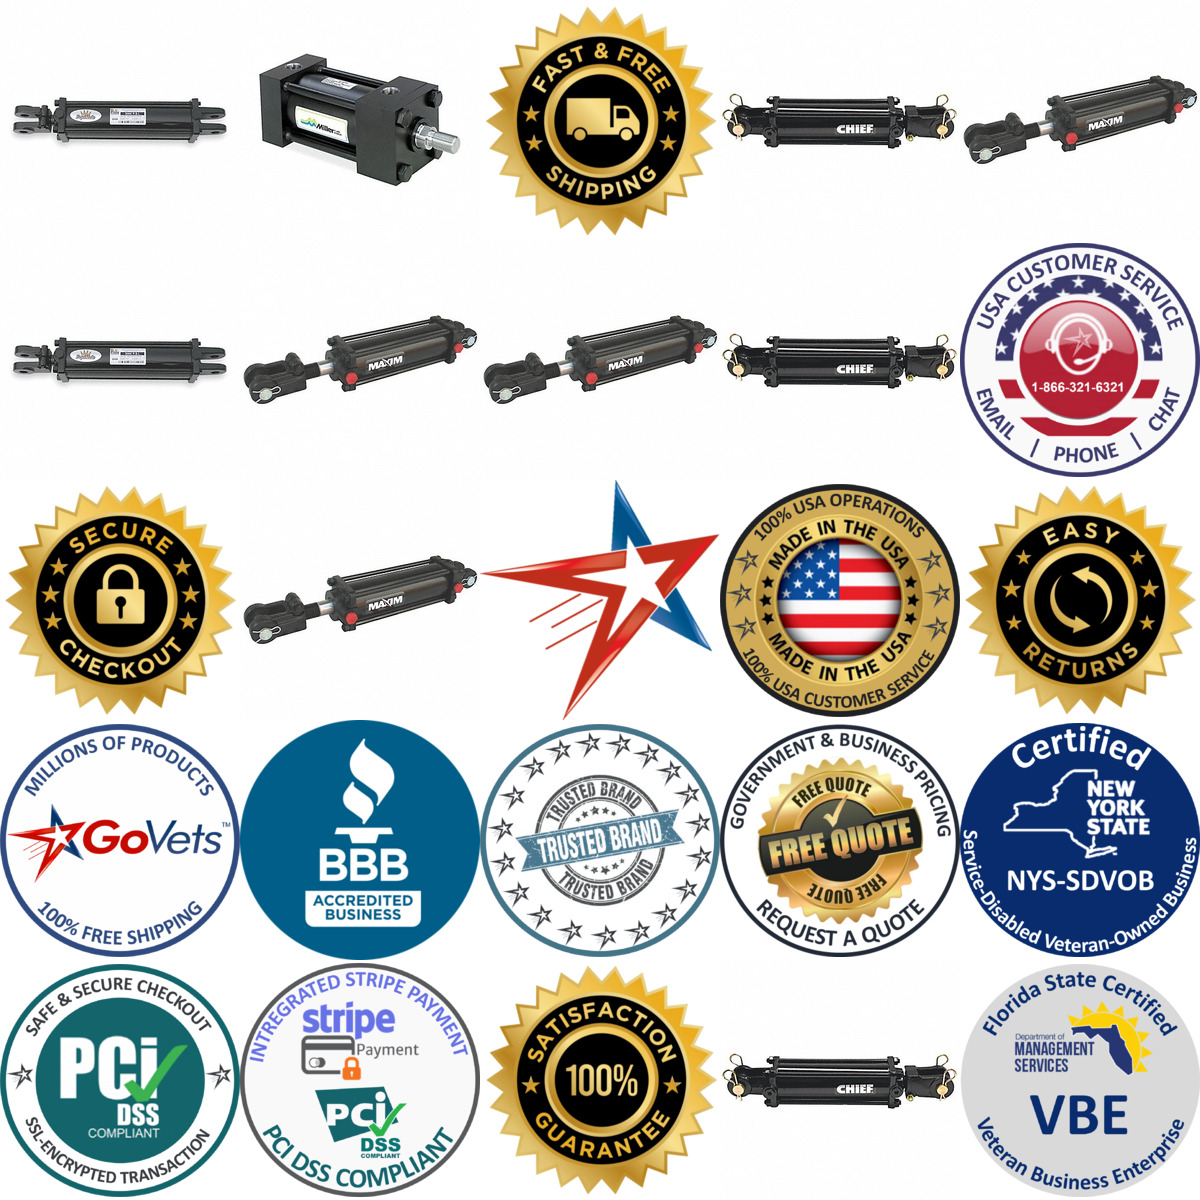 A selection of Tie Rod Hydraulic Cylinders products on GoVets